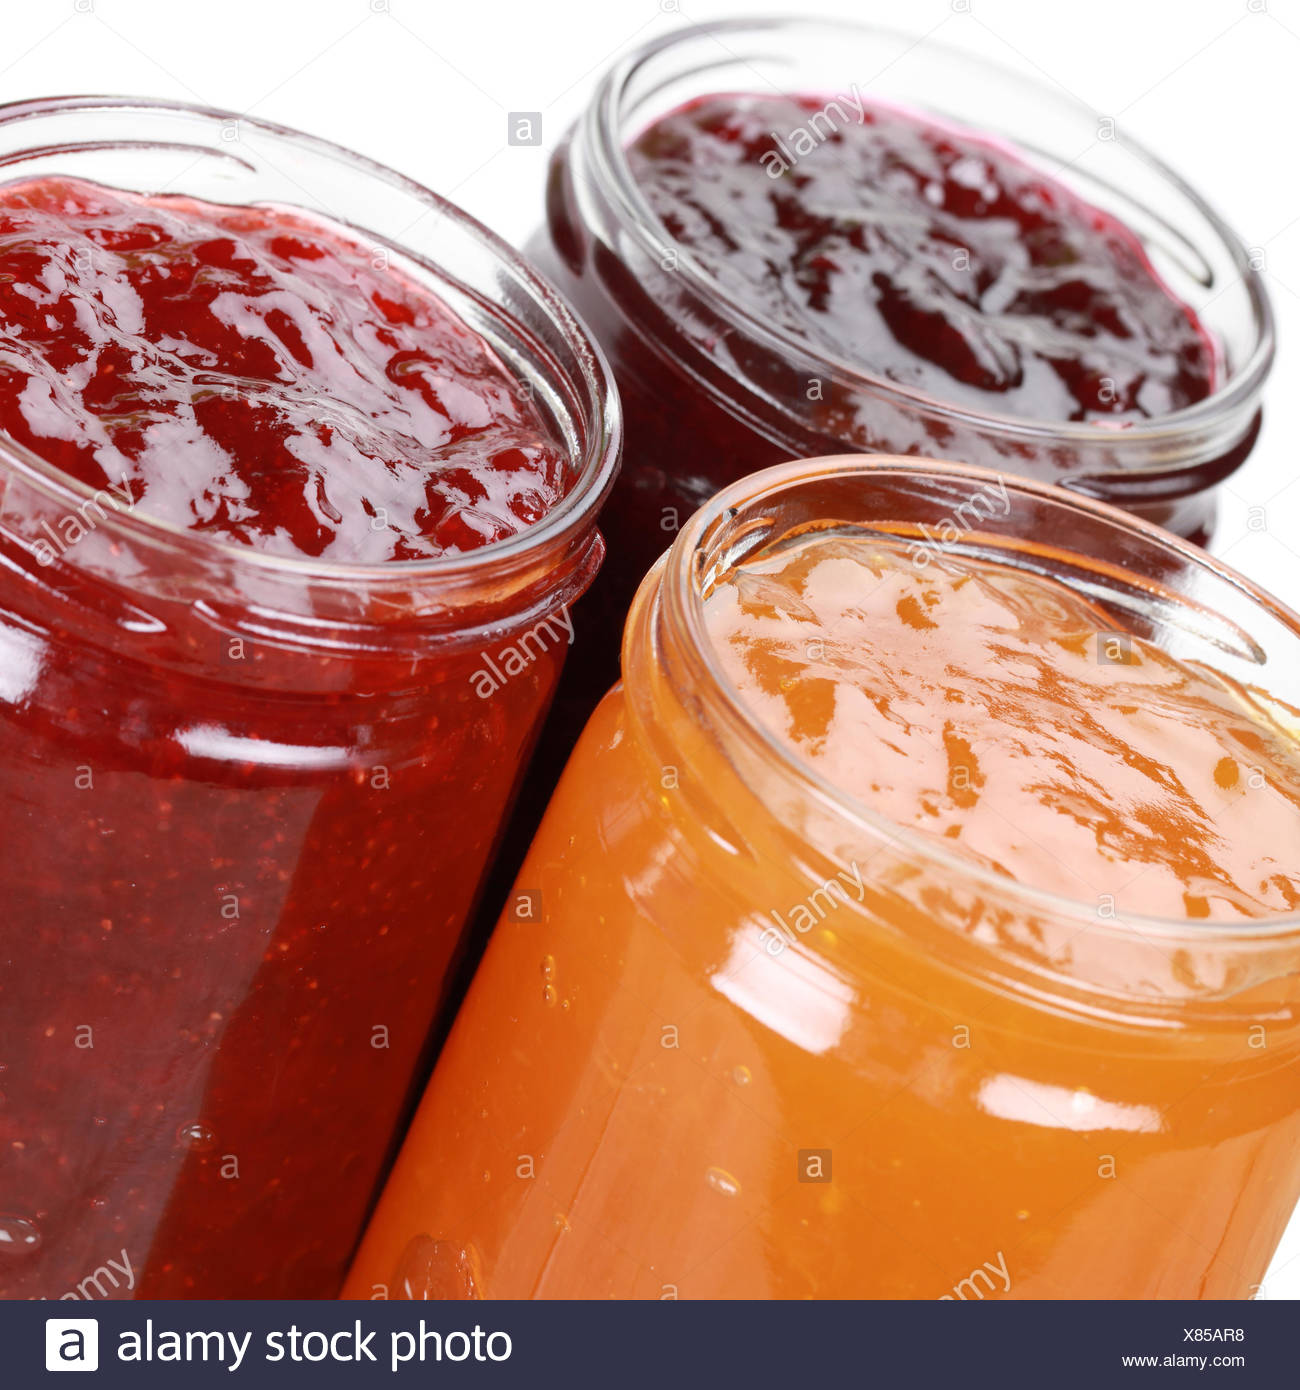 Beeren Marmelade High Resolution Stock Photography and Images - Alamy